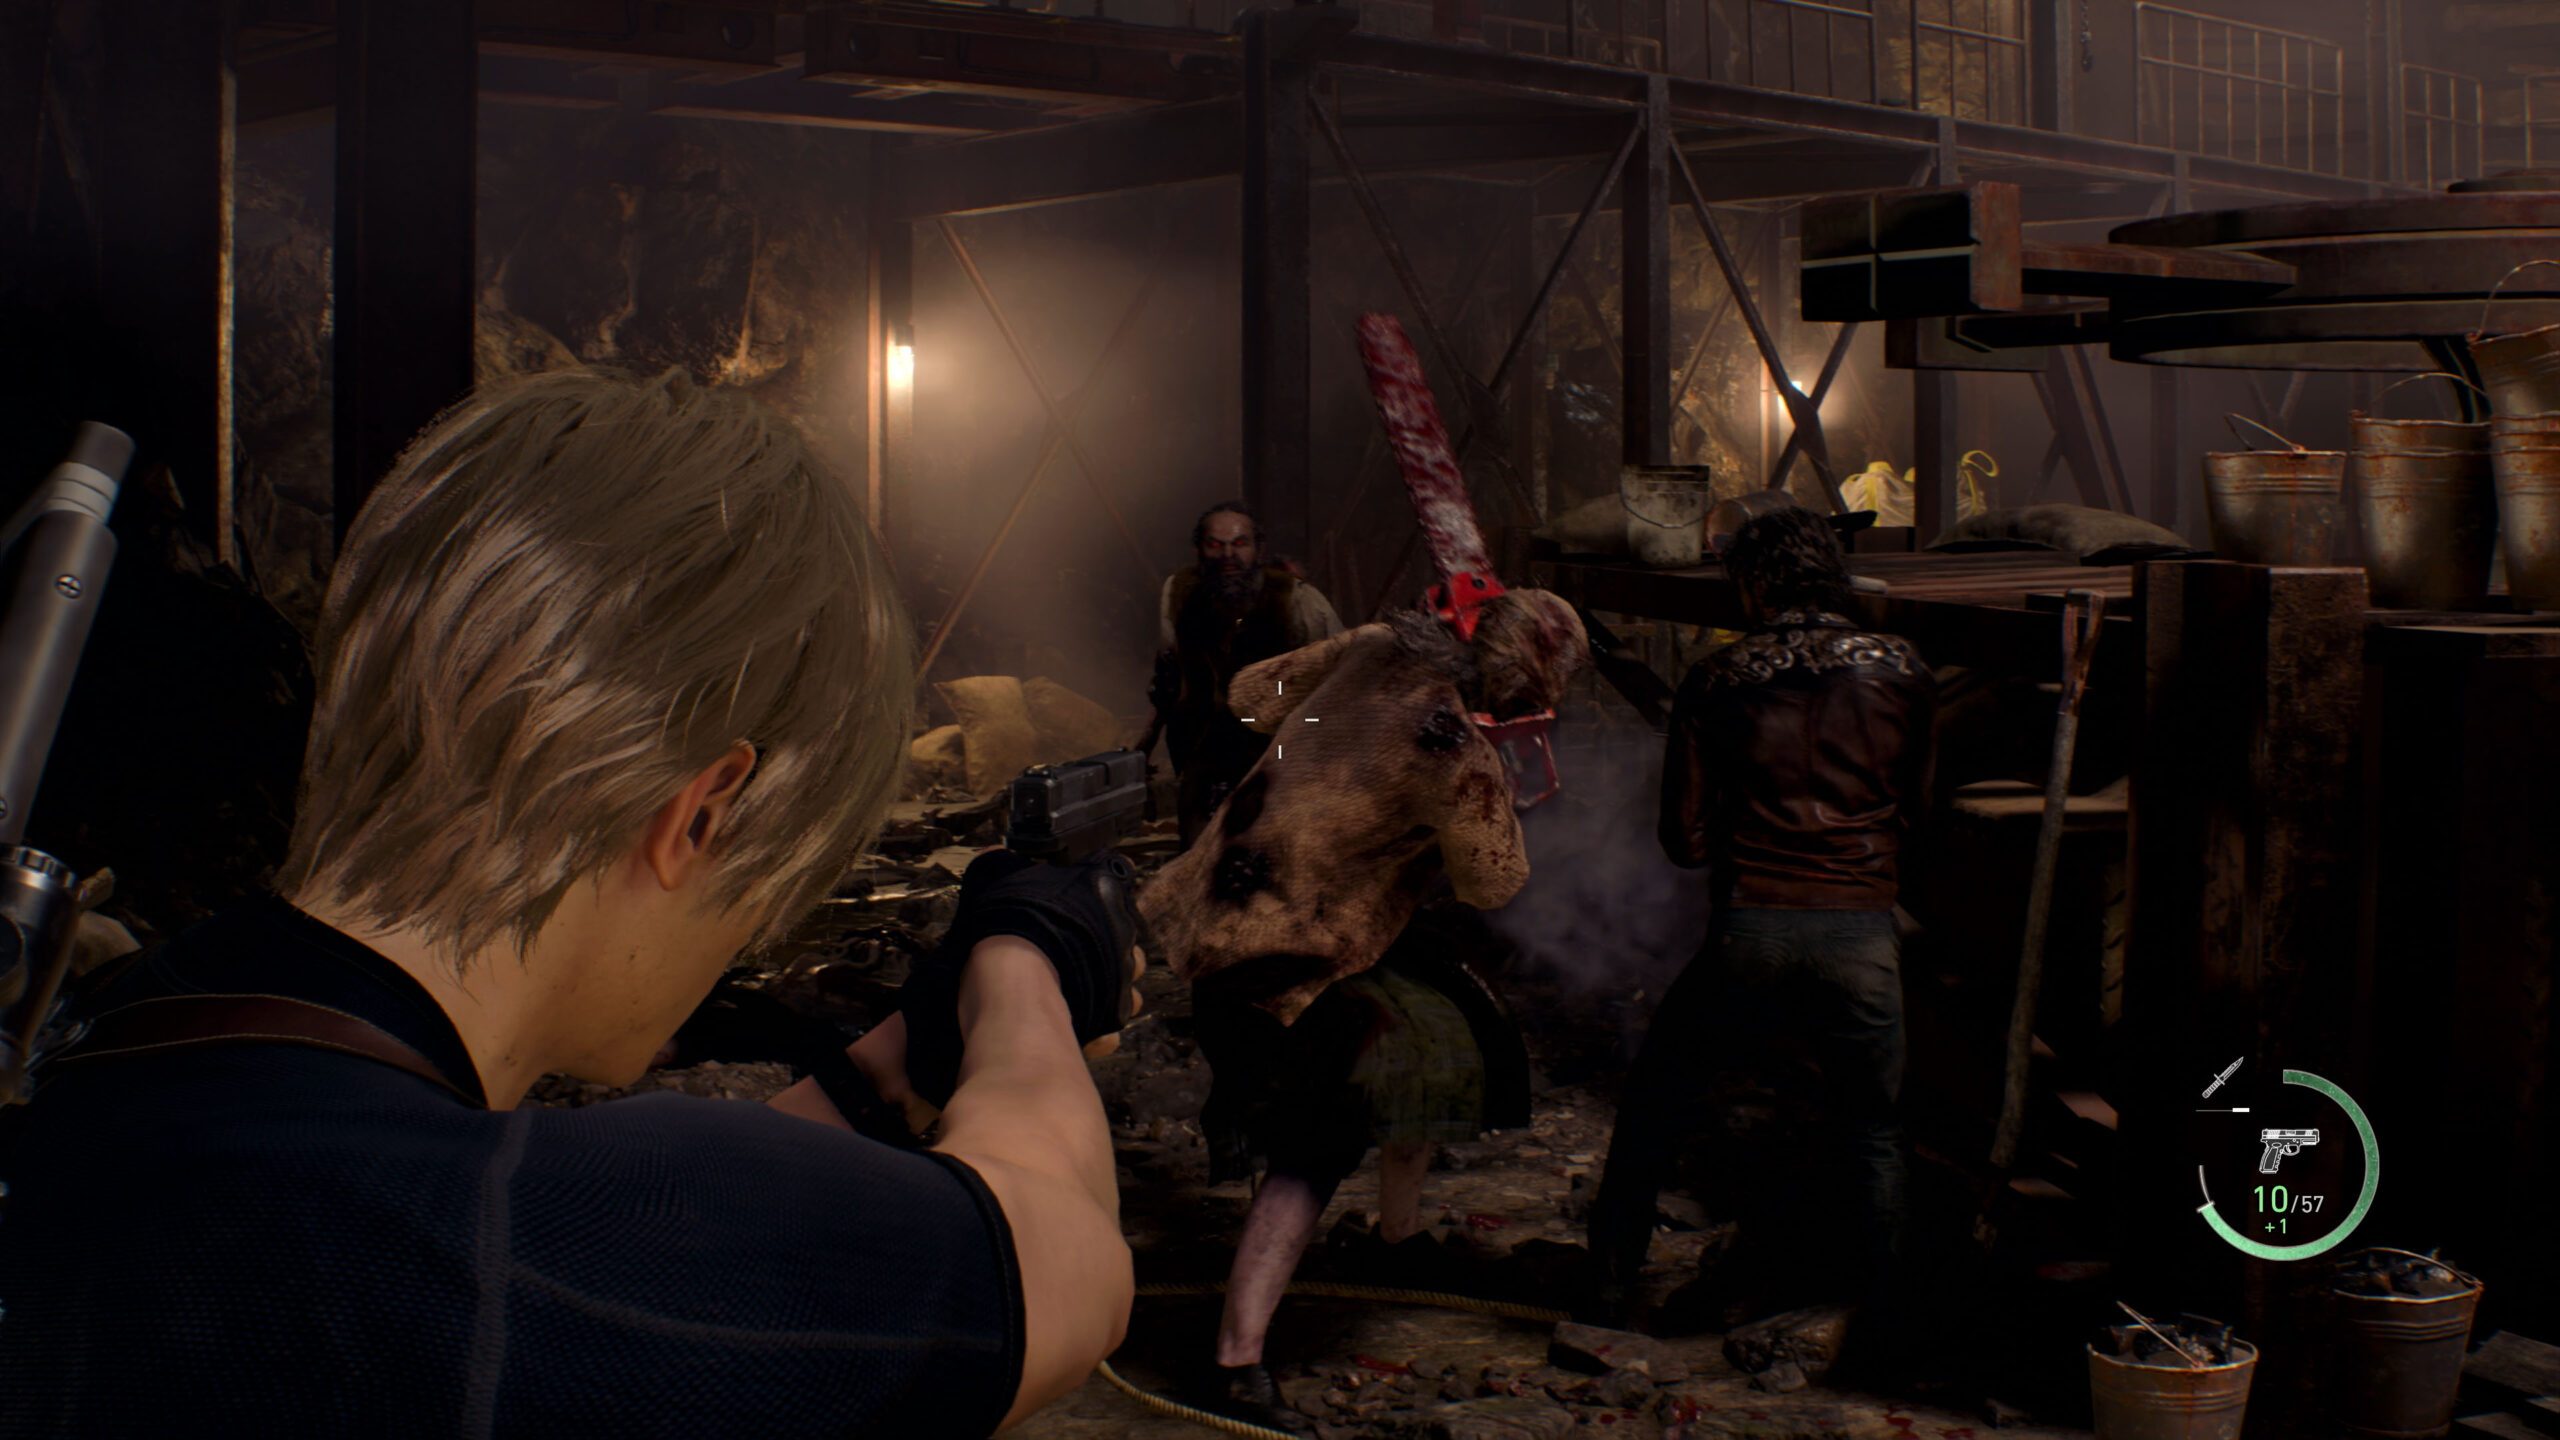 Leon points his gun’s sights at an advancing enemy who is wielding a chainsaw.